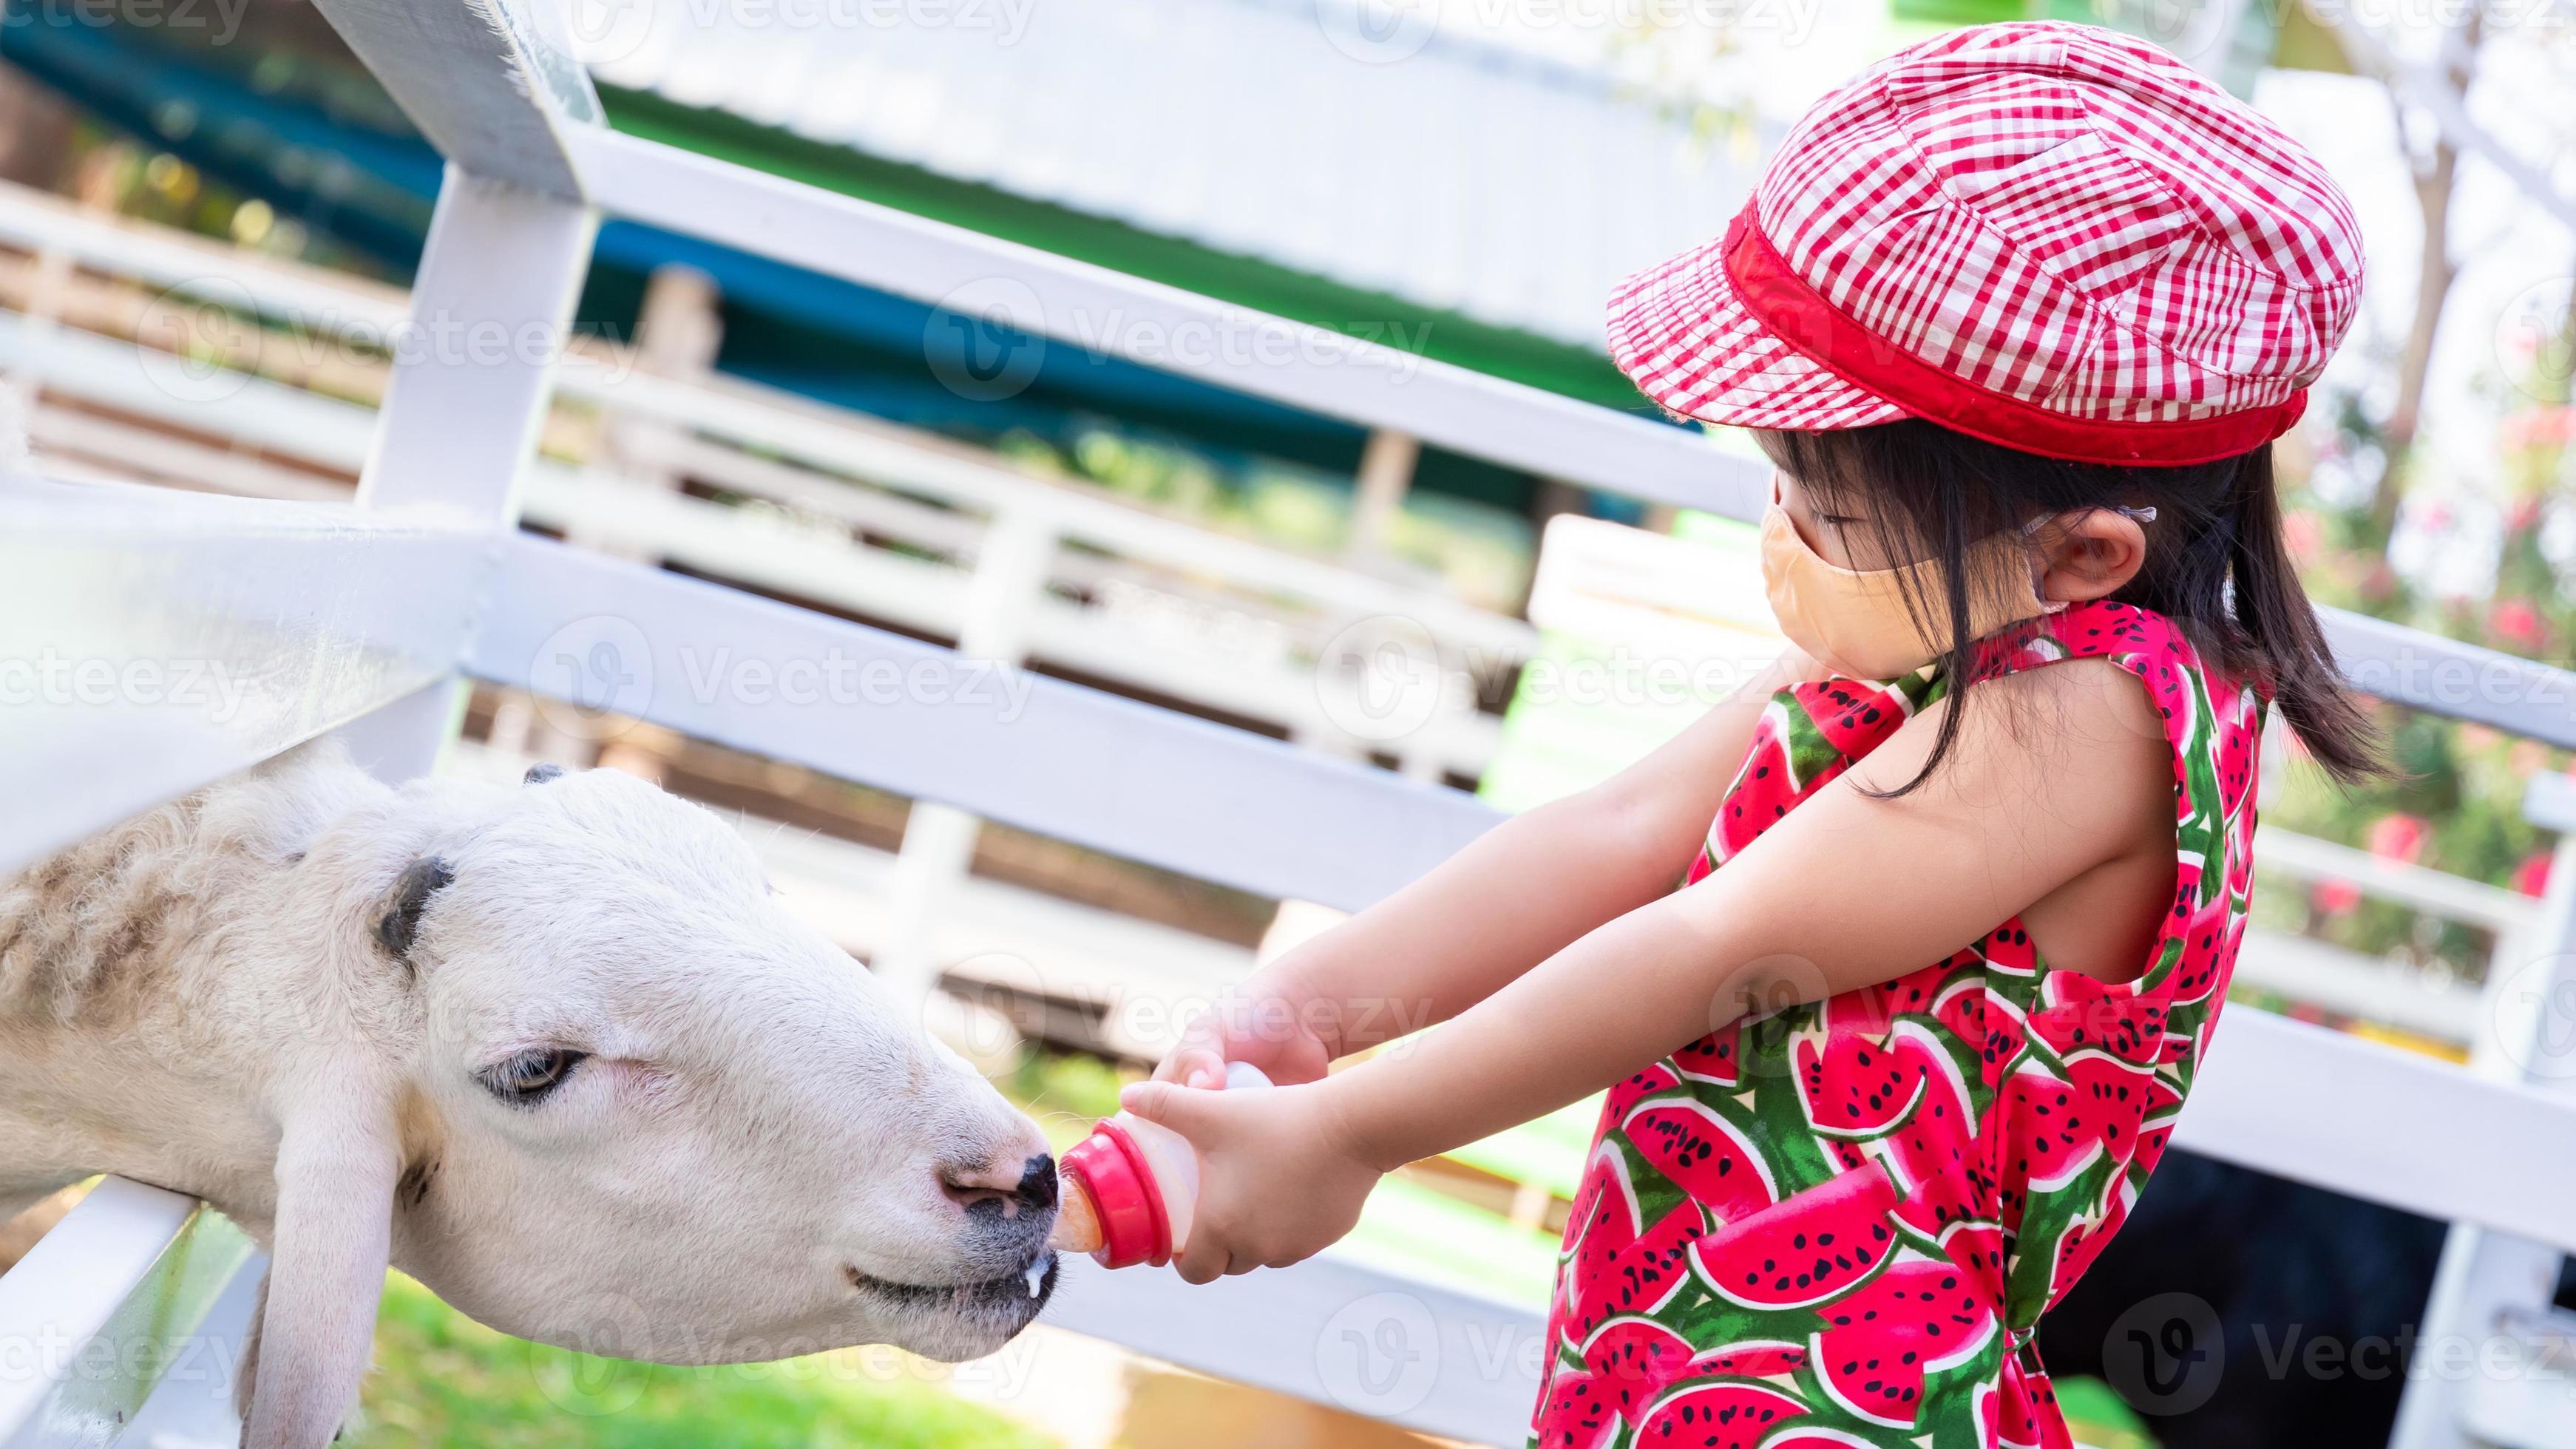 Girl wear orange cloth mask to prevent spread of COVID-19 disease. Child is  touring animal farm. Happy kid feeding milk to white goat. A 4 year old is  wearing a red hat